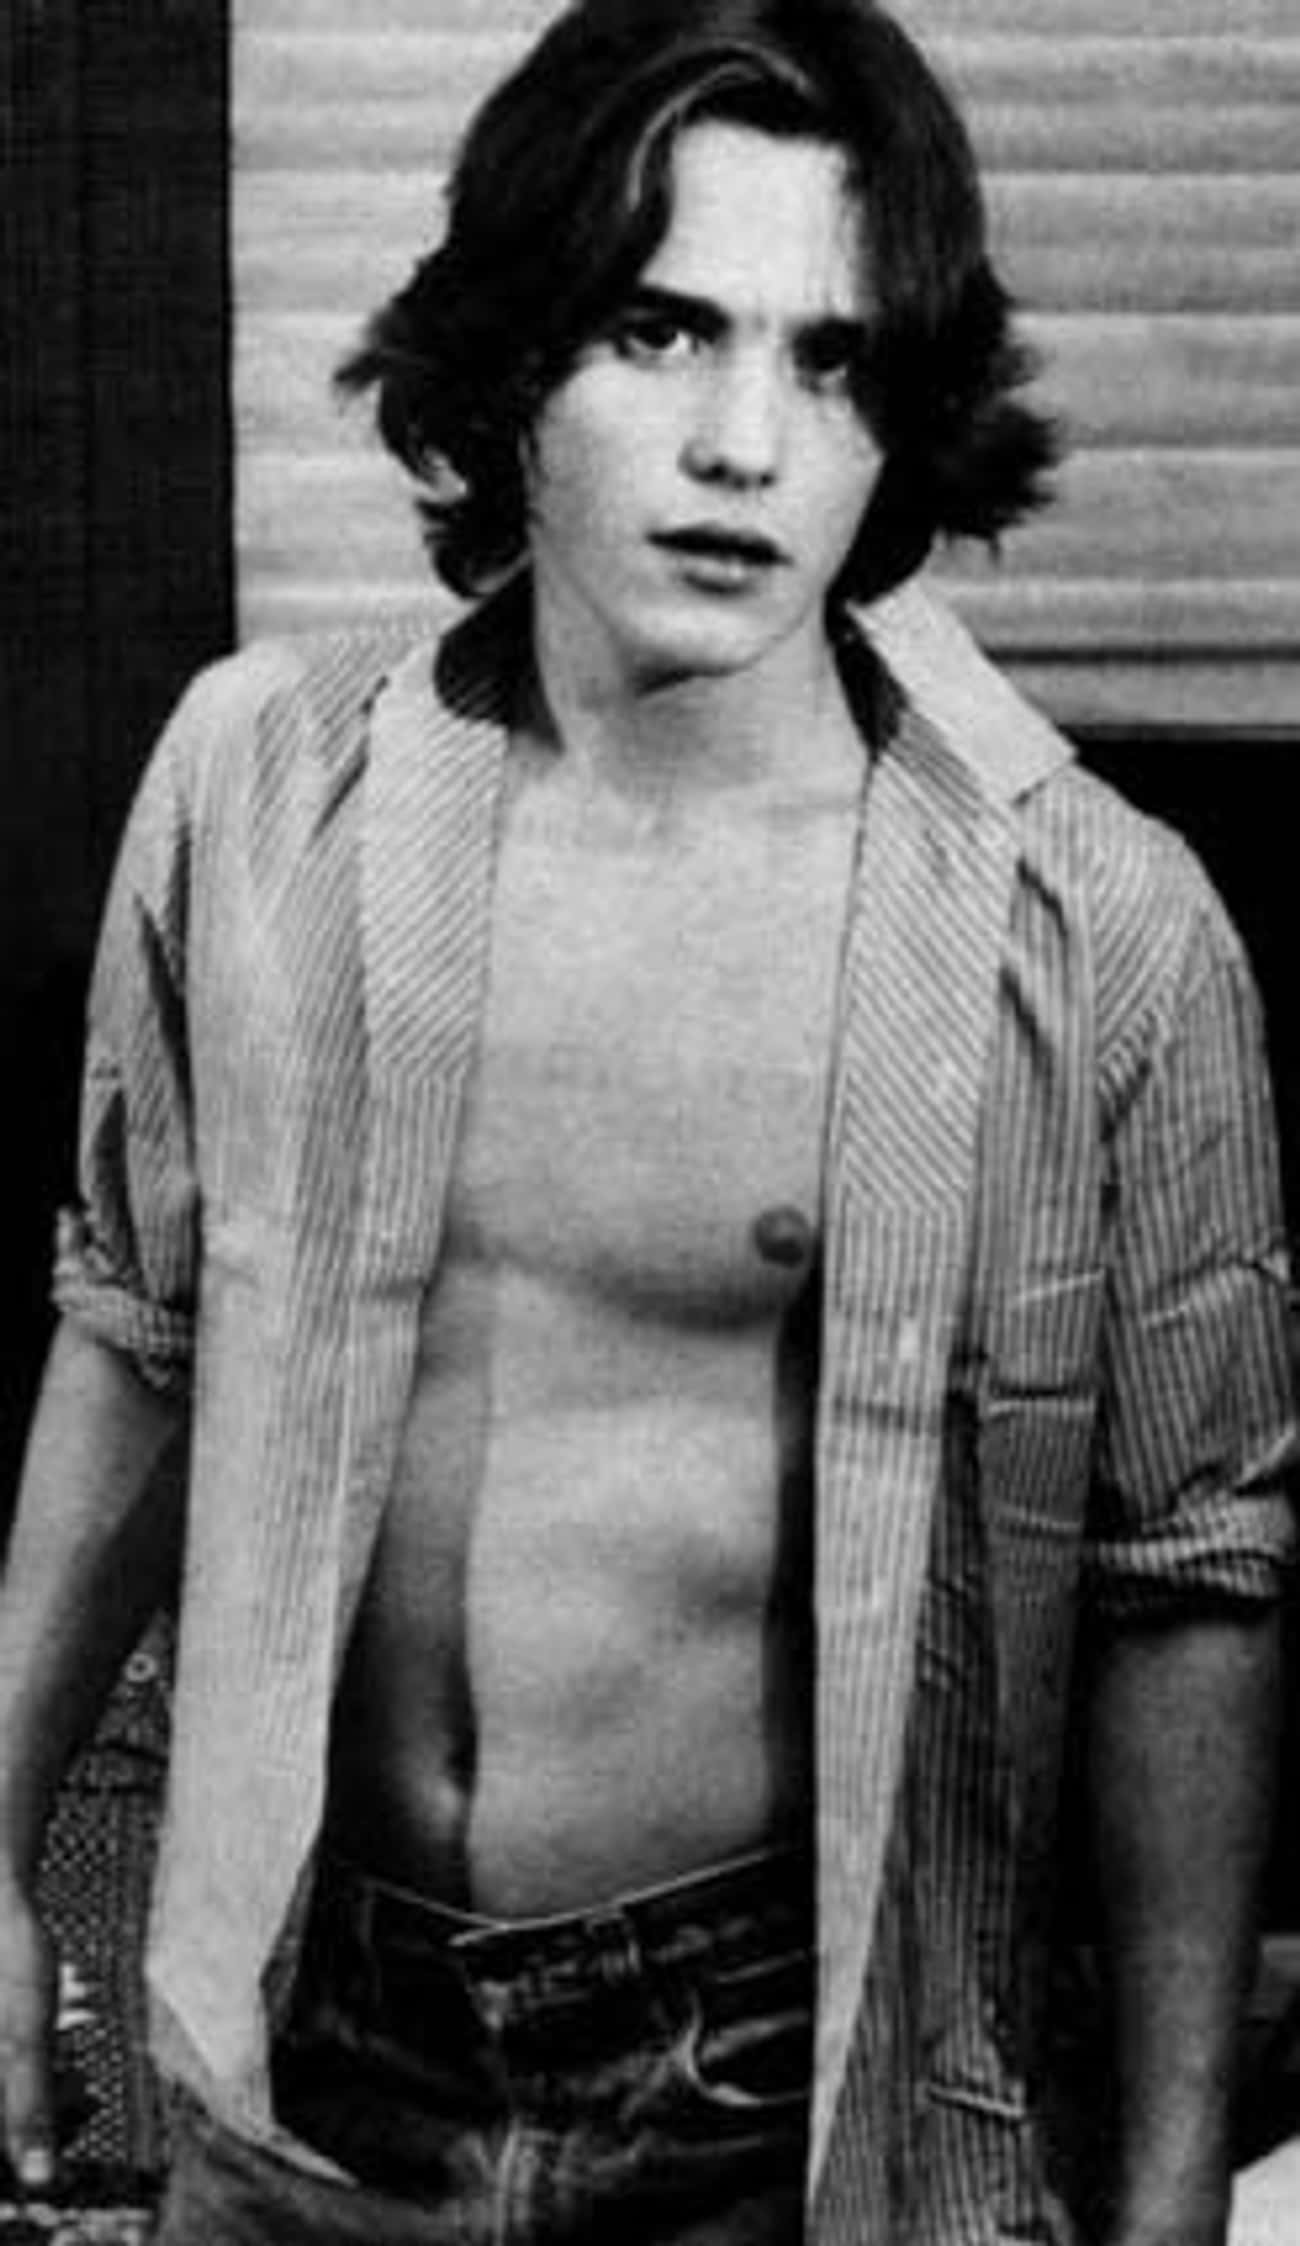 Young Matt Dillon in Unbuttoned Shirt and Jeans